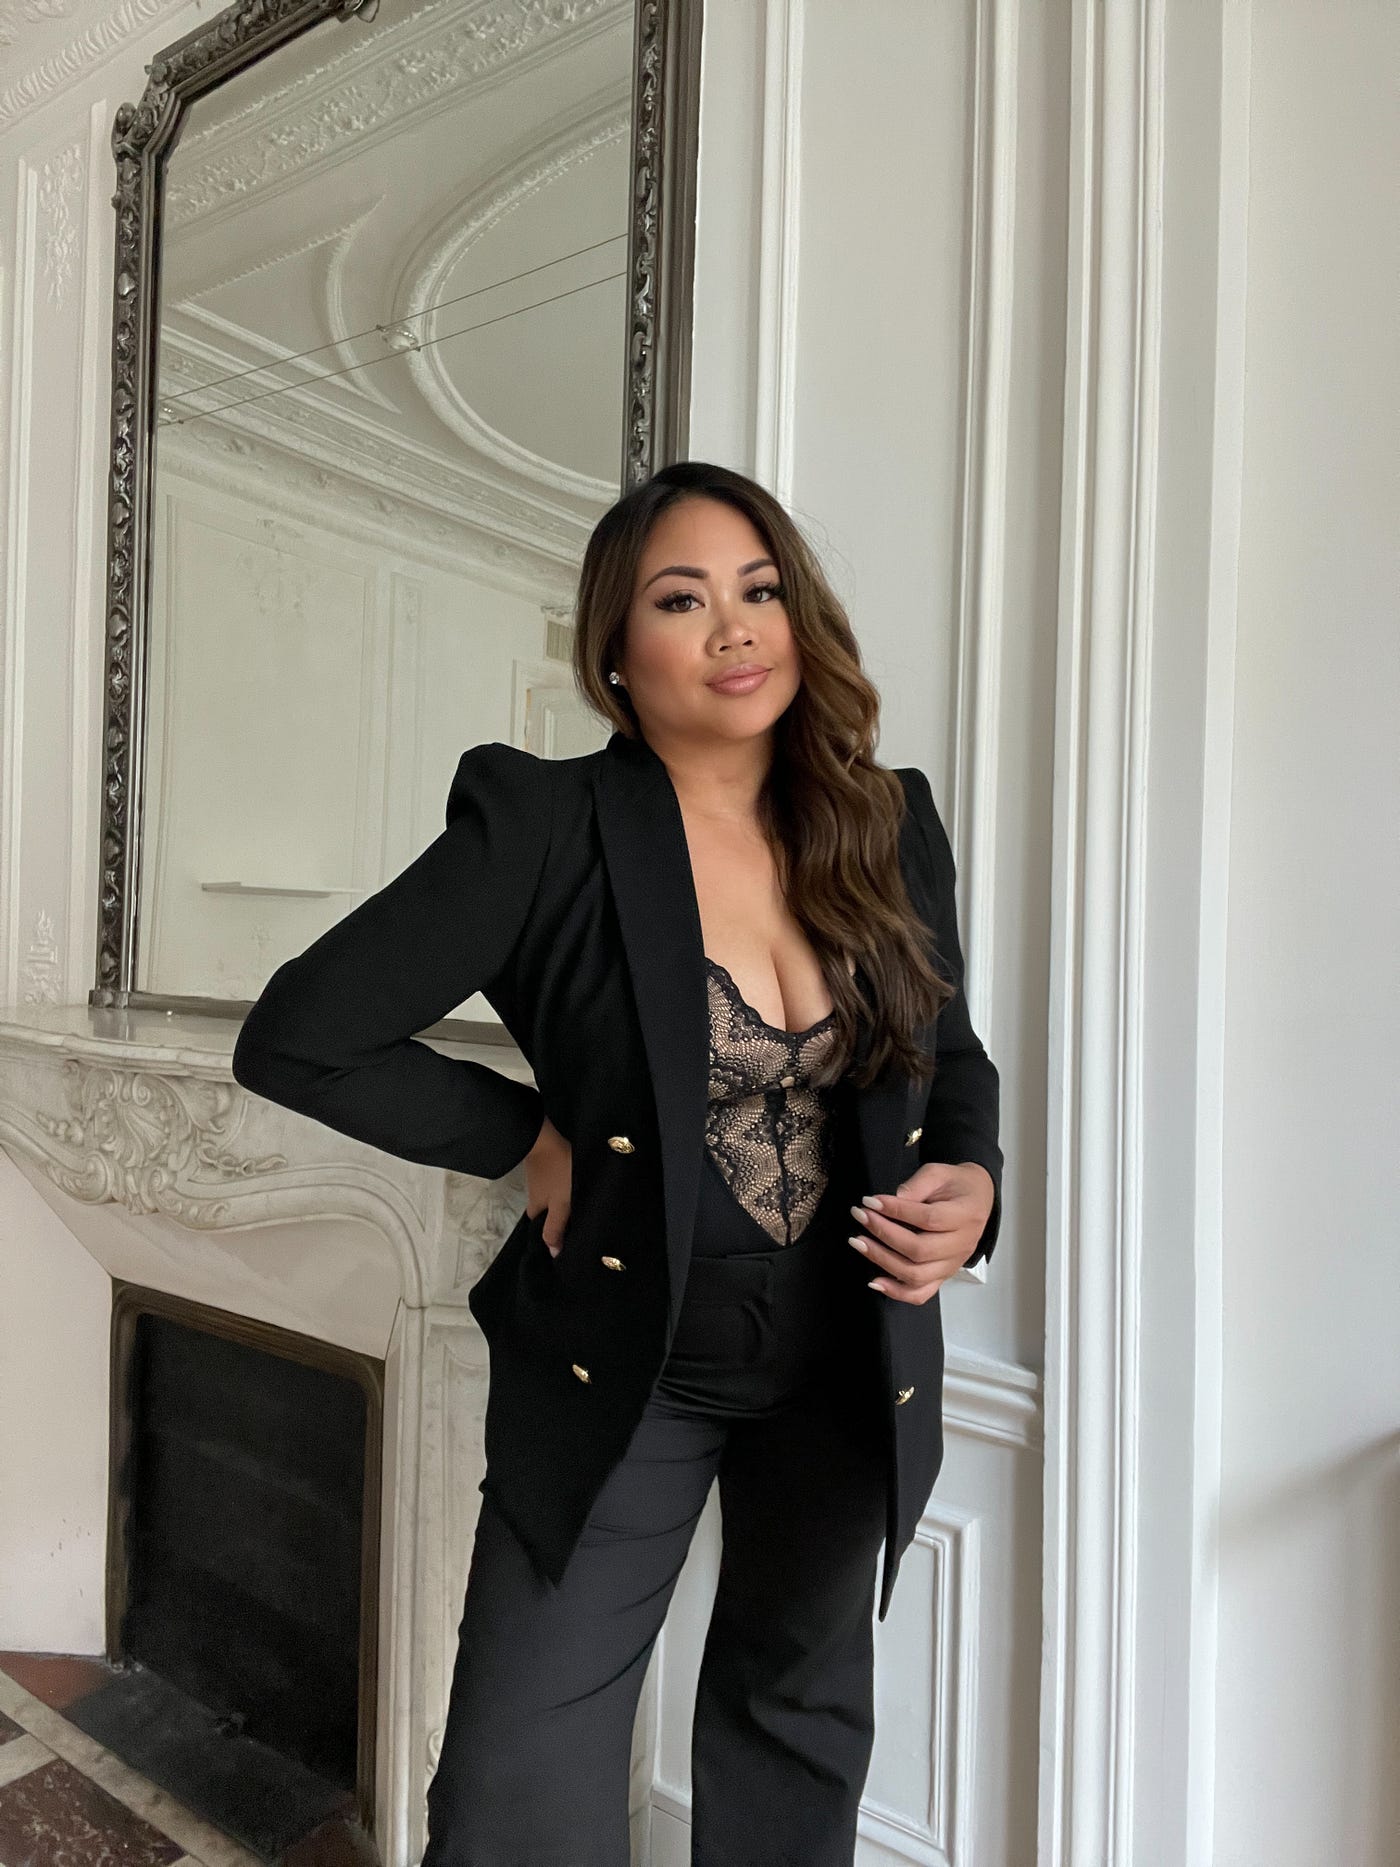 Female Founders: Ratchel Pinlac of Pinsy Shapewear On The Five Things You  Need To Thrive and Succeed as a Woman Founder, by Candice Georgiadis, Authority Magazine